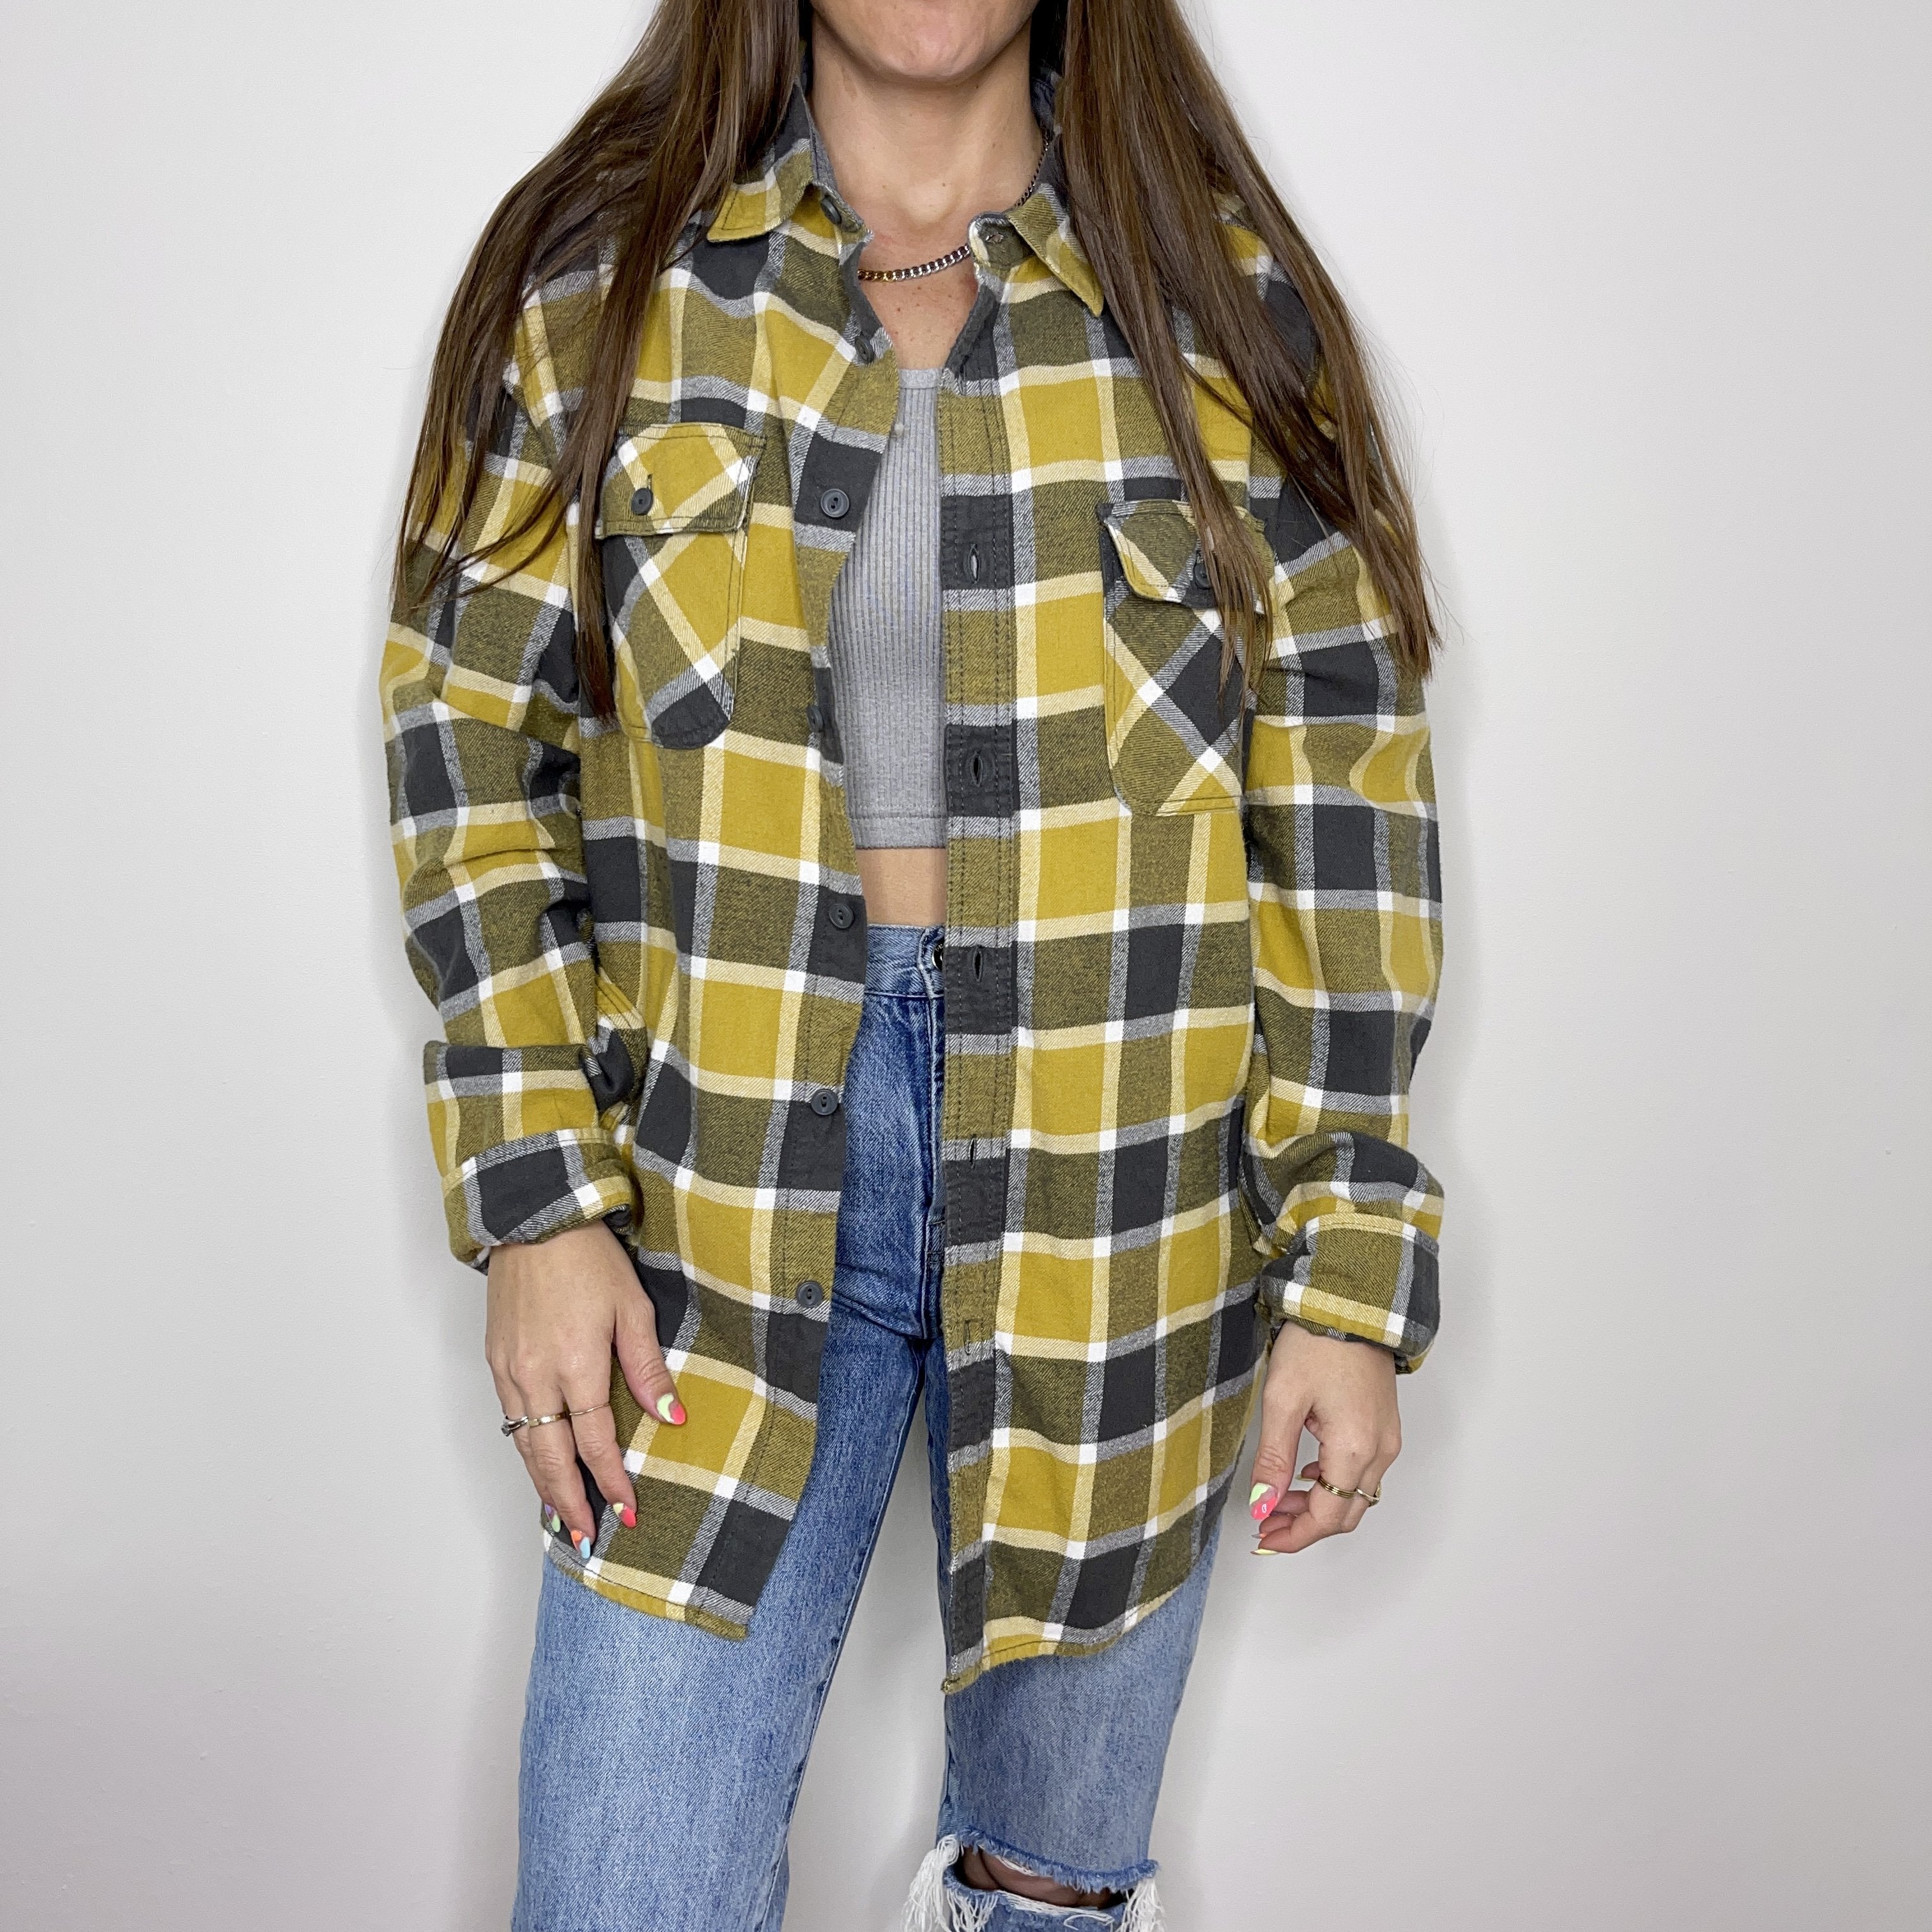 Flannel - L - Yellow/Grey Flannel - 4 DOTS